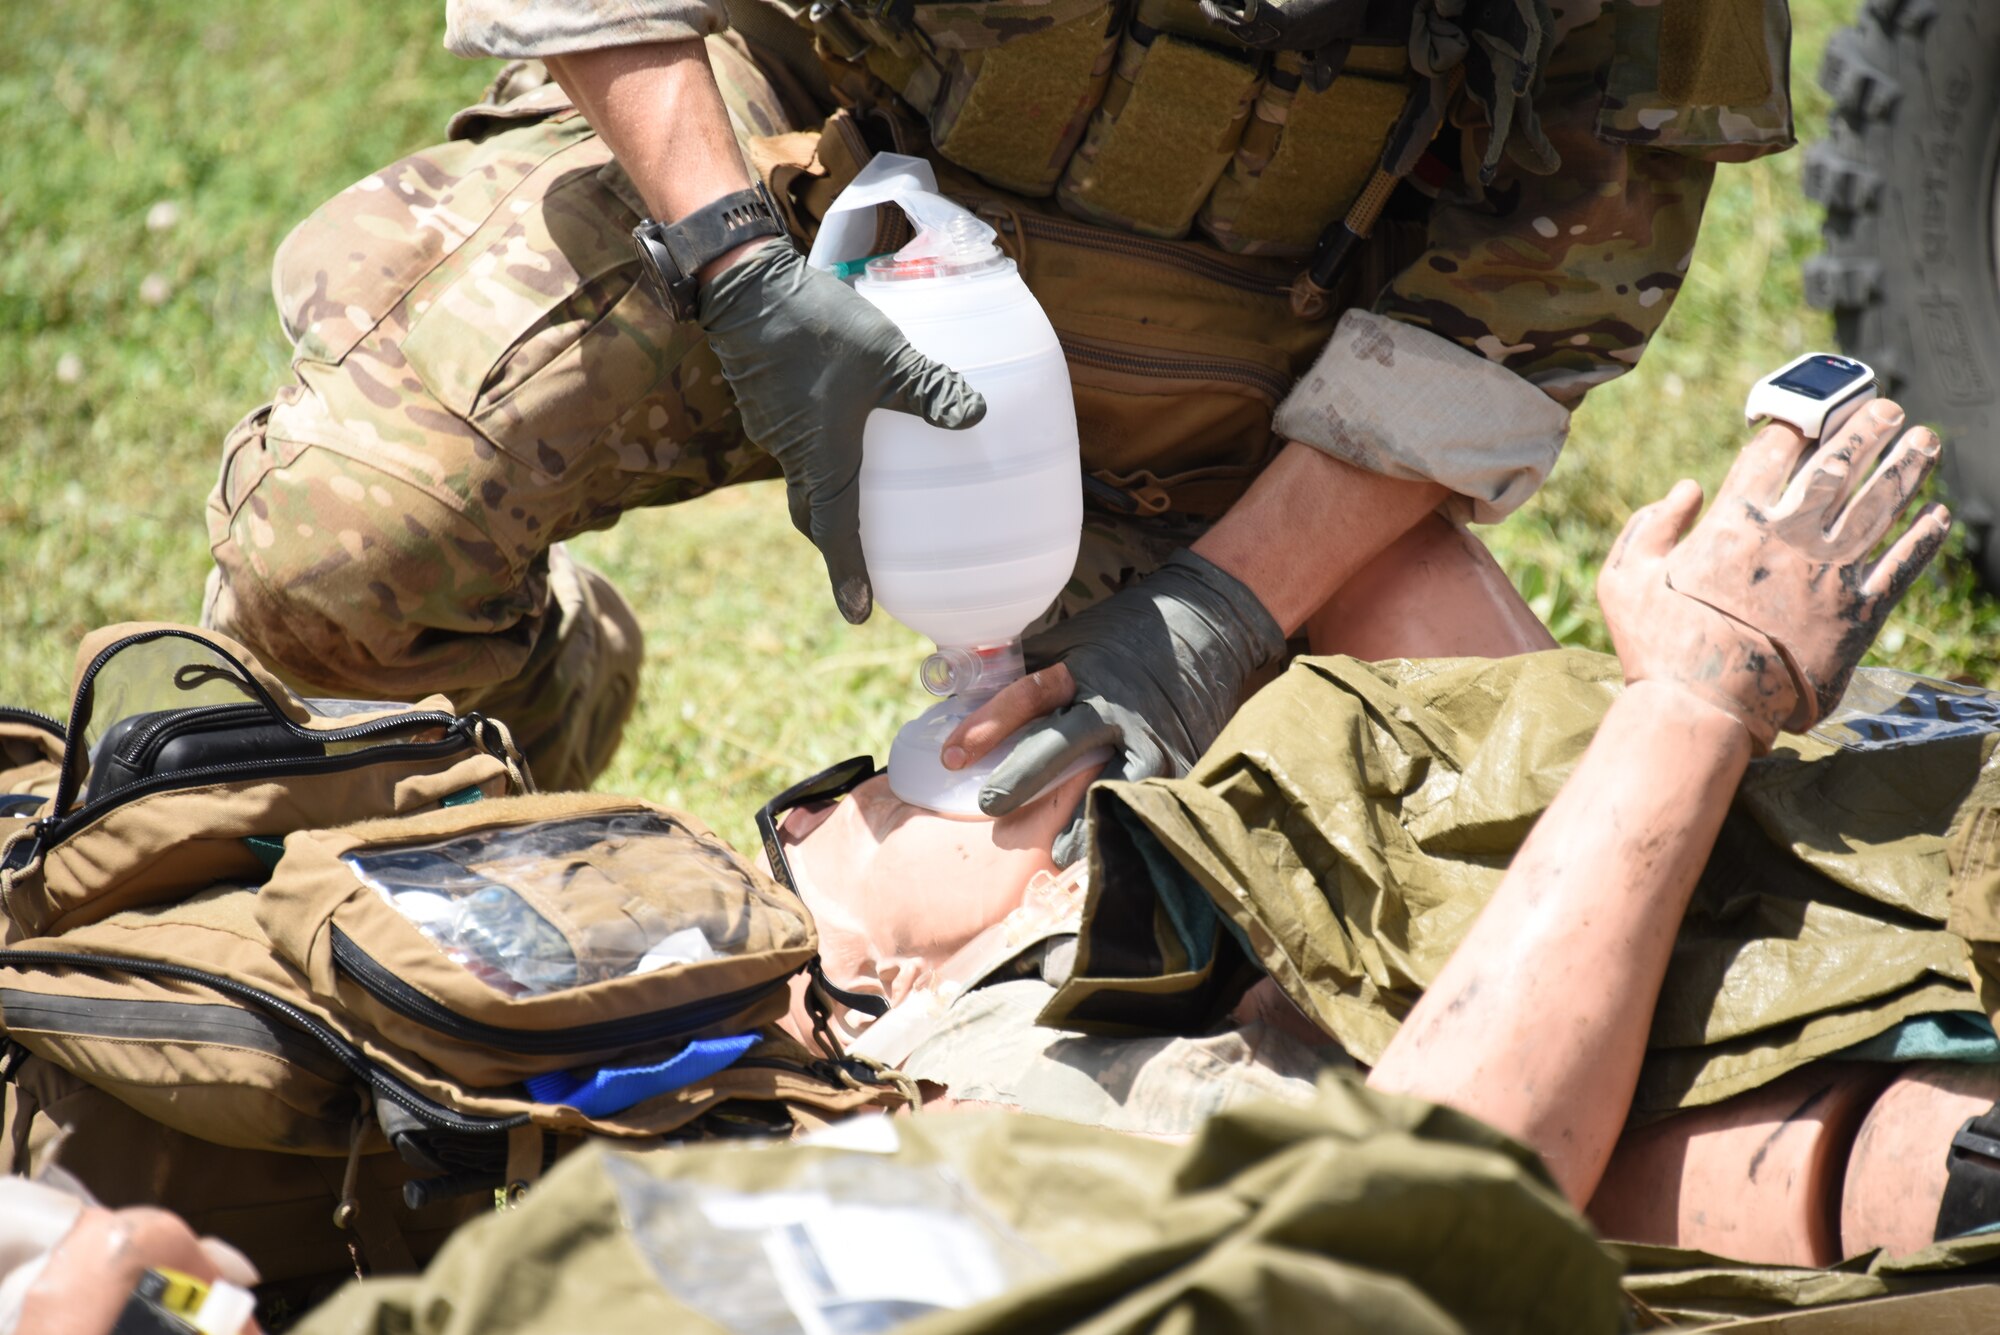 A photo of a pararescueman operating on a simulated injured victim.